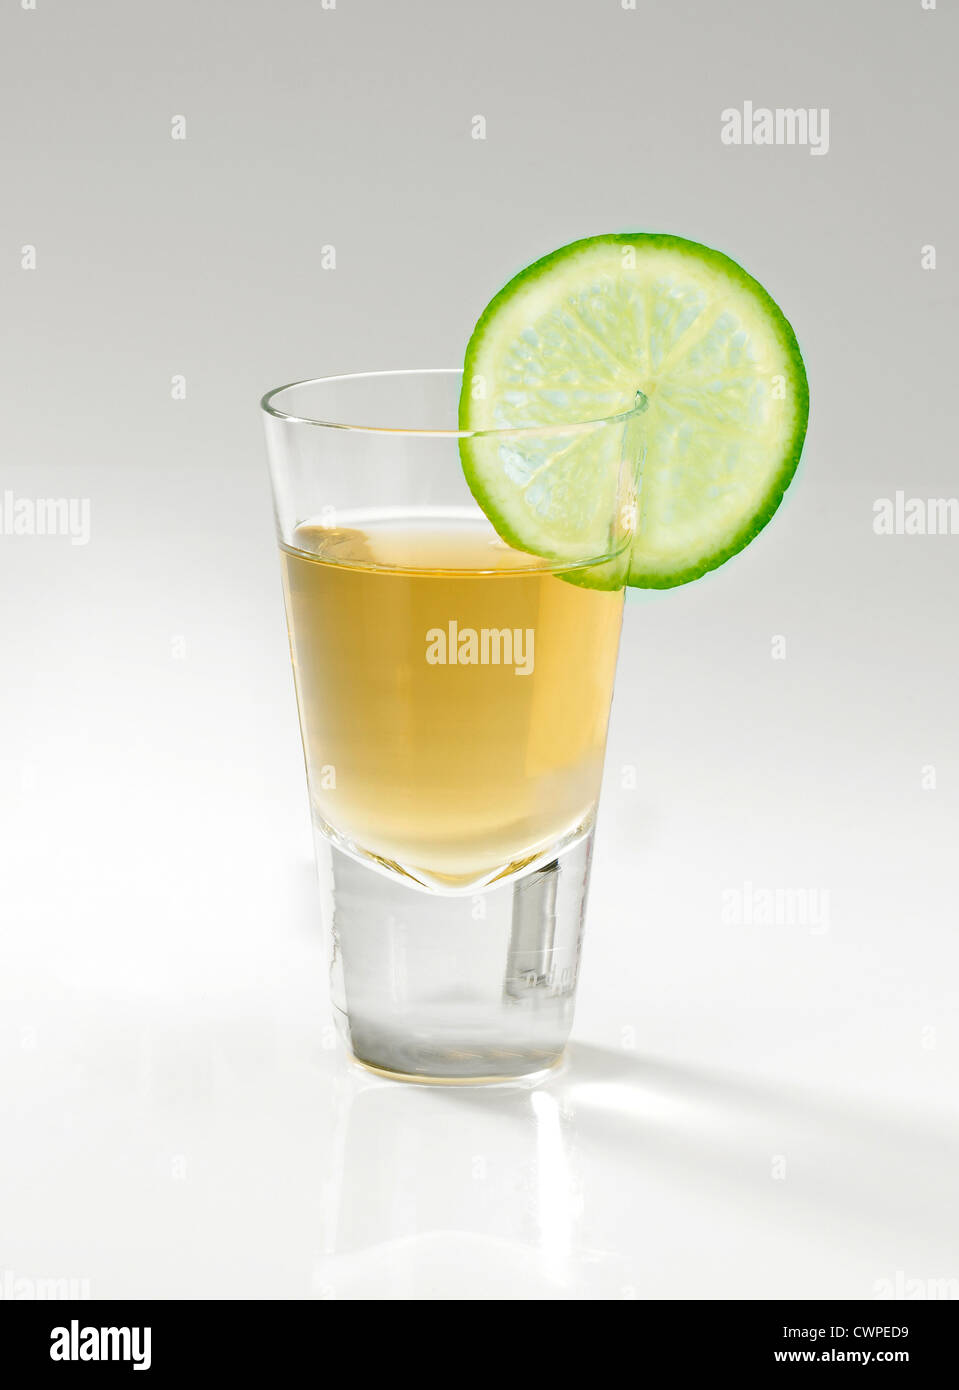 A shot glass of Tequila and a slice of Lime on a graduated grey background Stock Photo